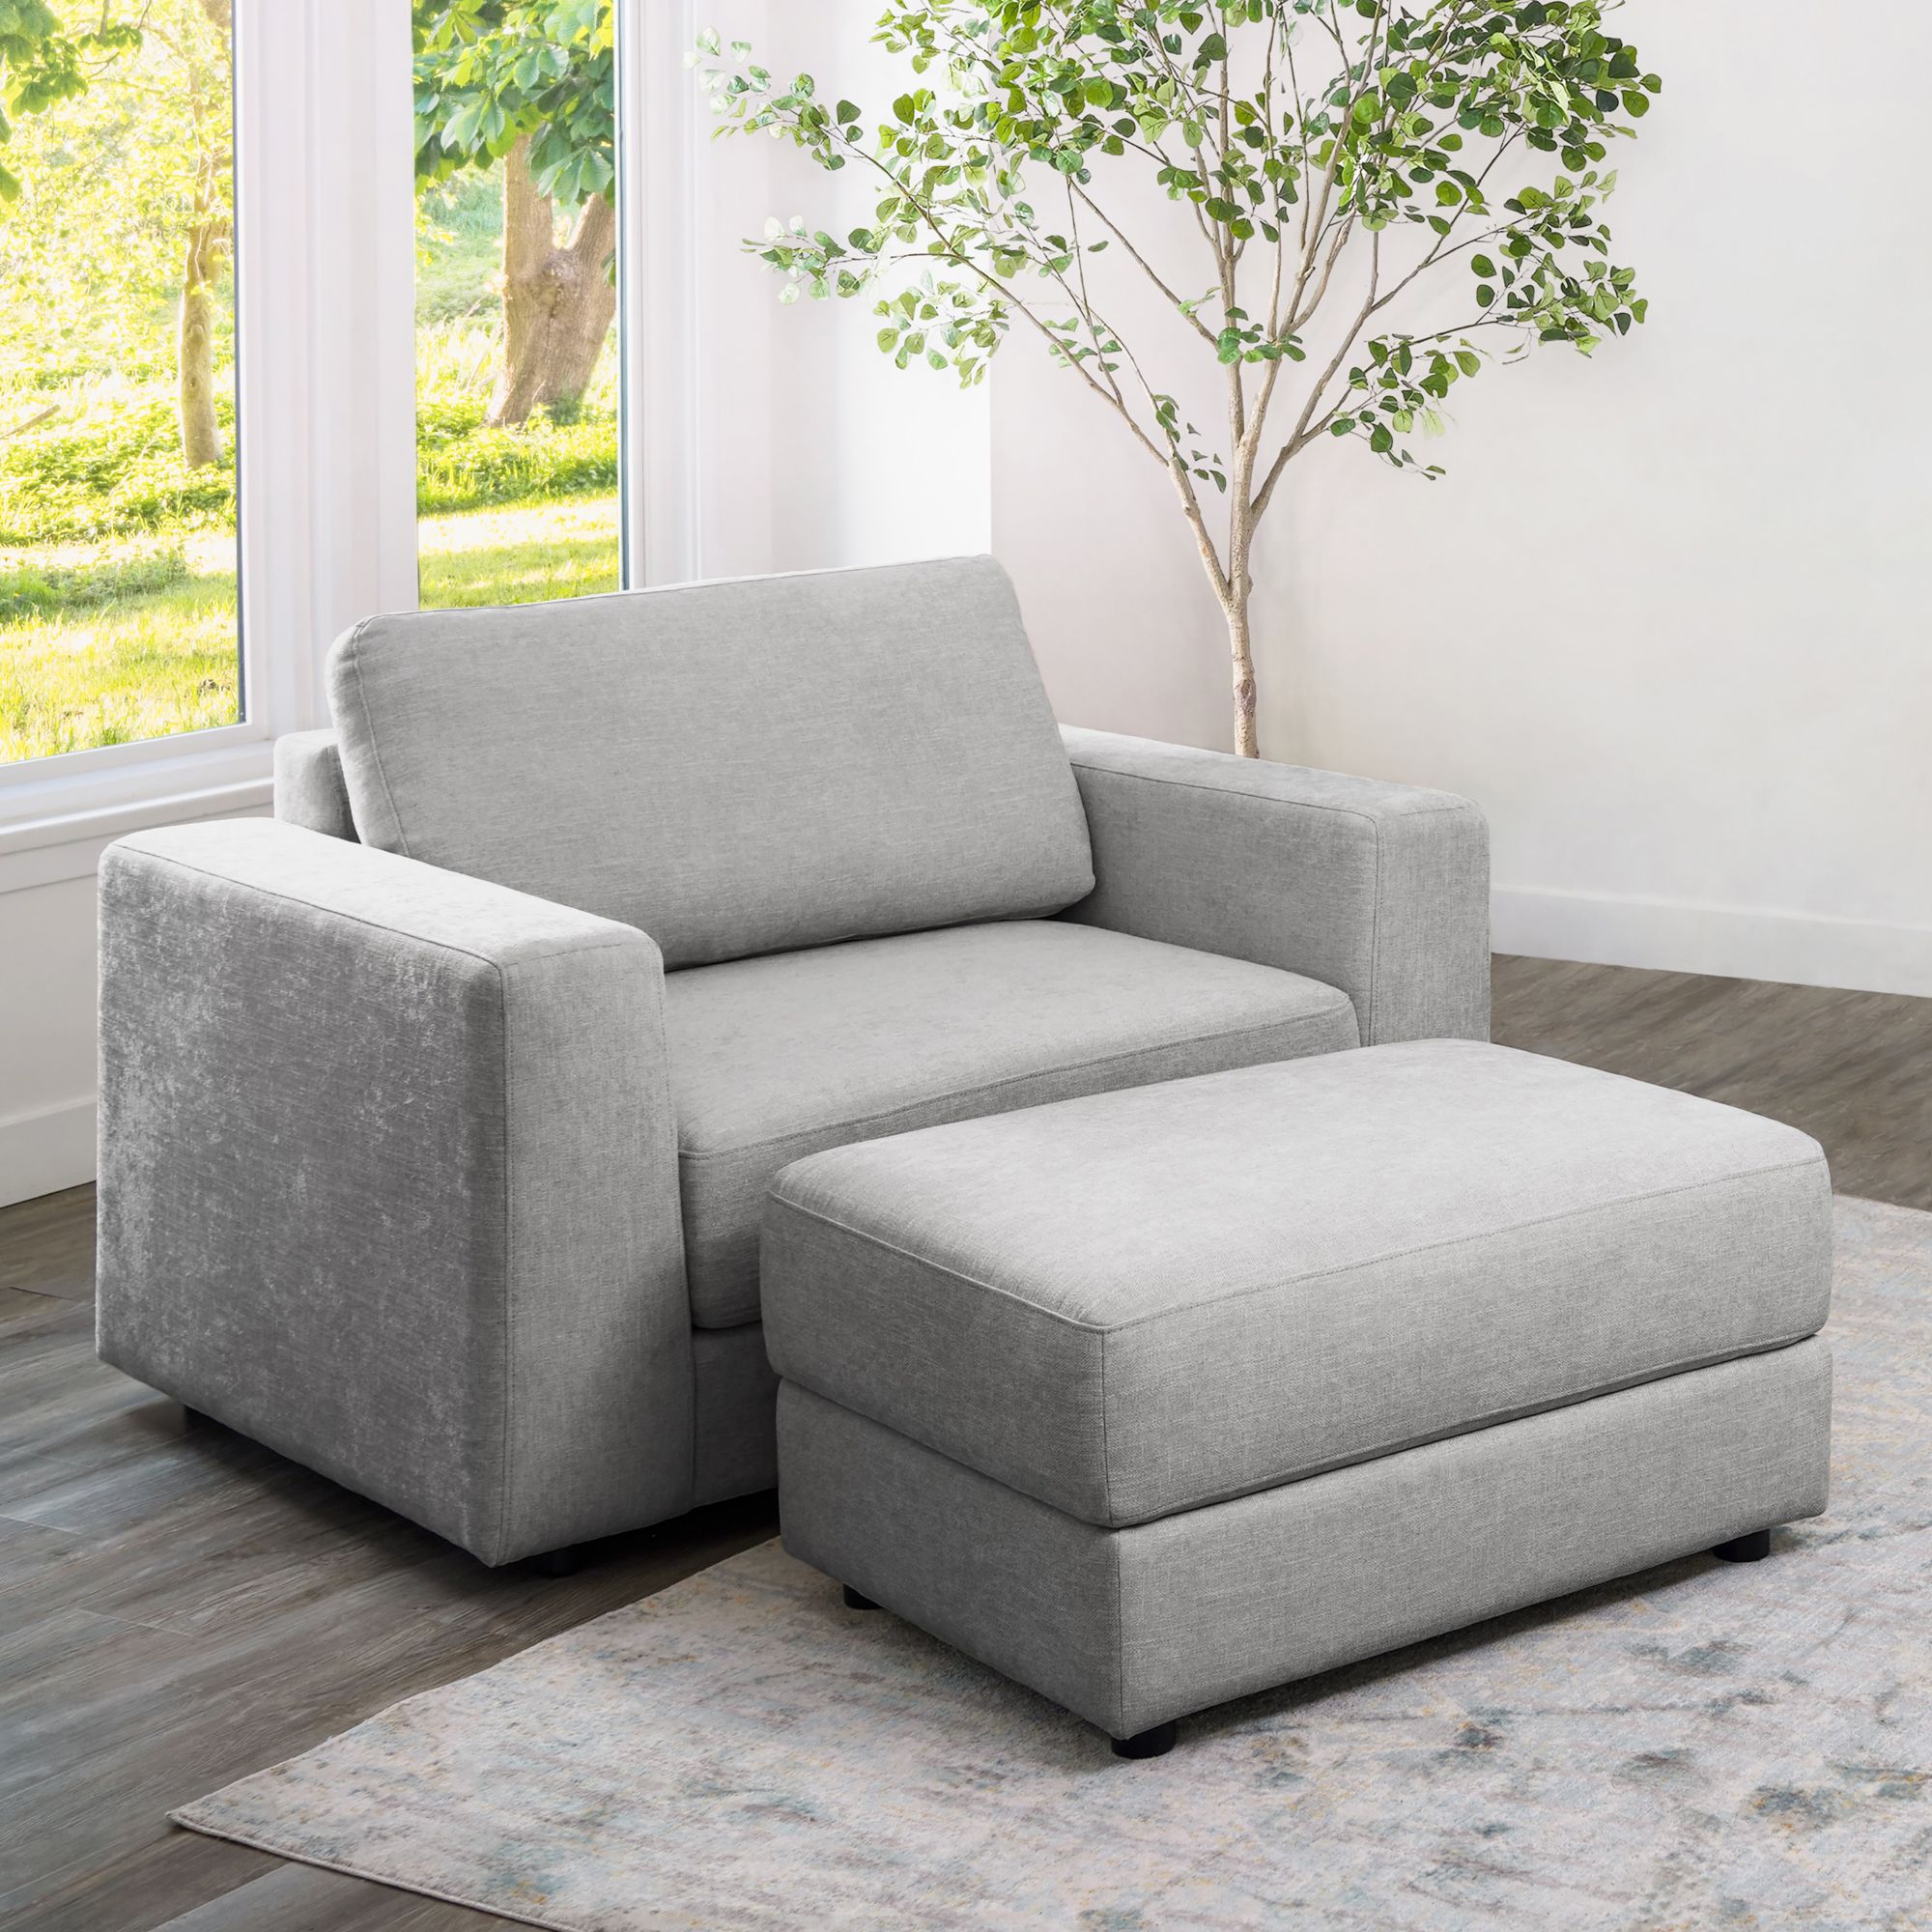 Abbyson Elizabeth Stain Resistant Fabric Oversized Armchair and Ottoman Set  - Light Gray